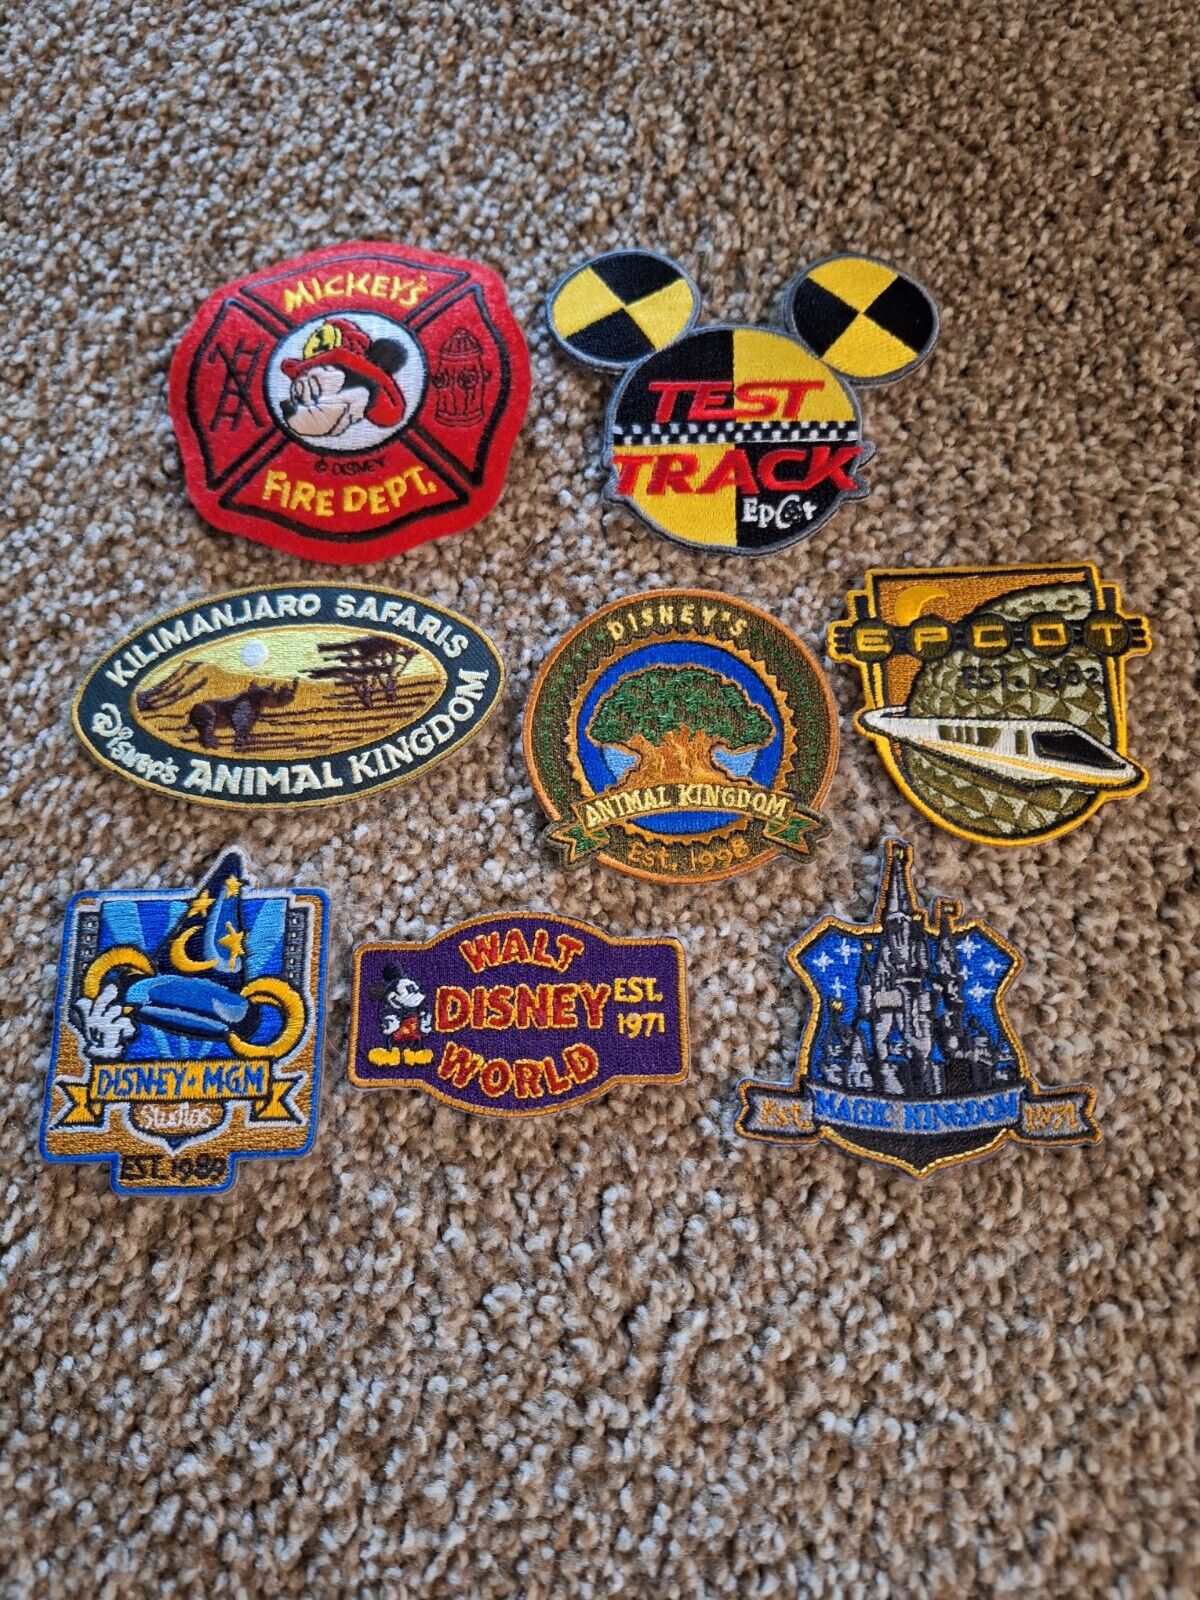 Lot of Walt Disney World Patches/Test Track/Fire Dept./MGM